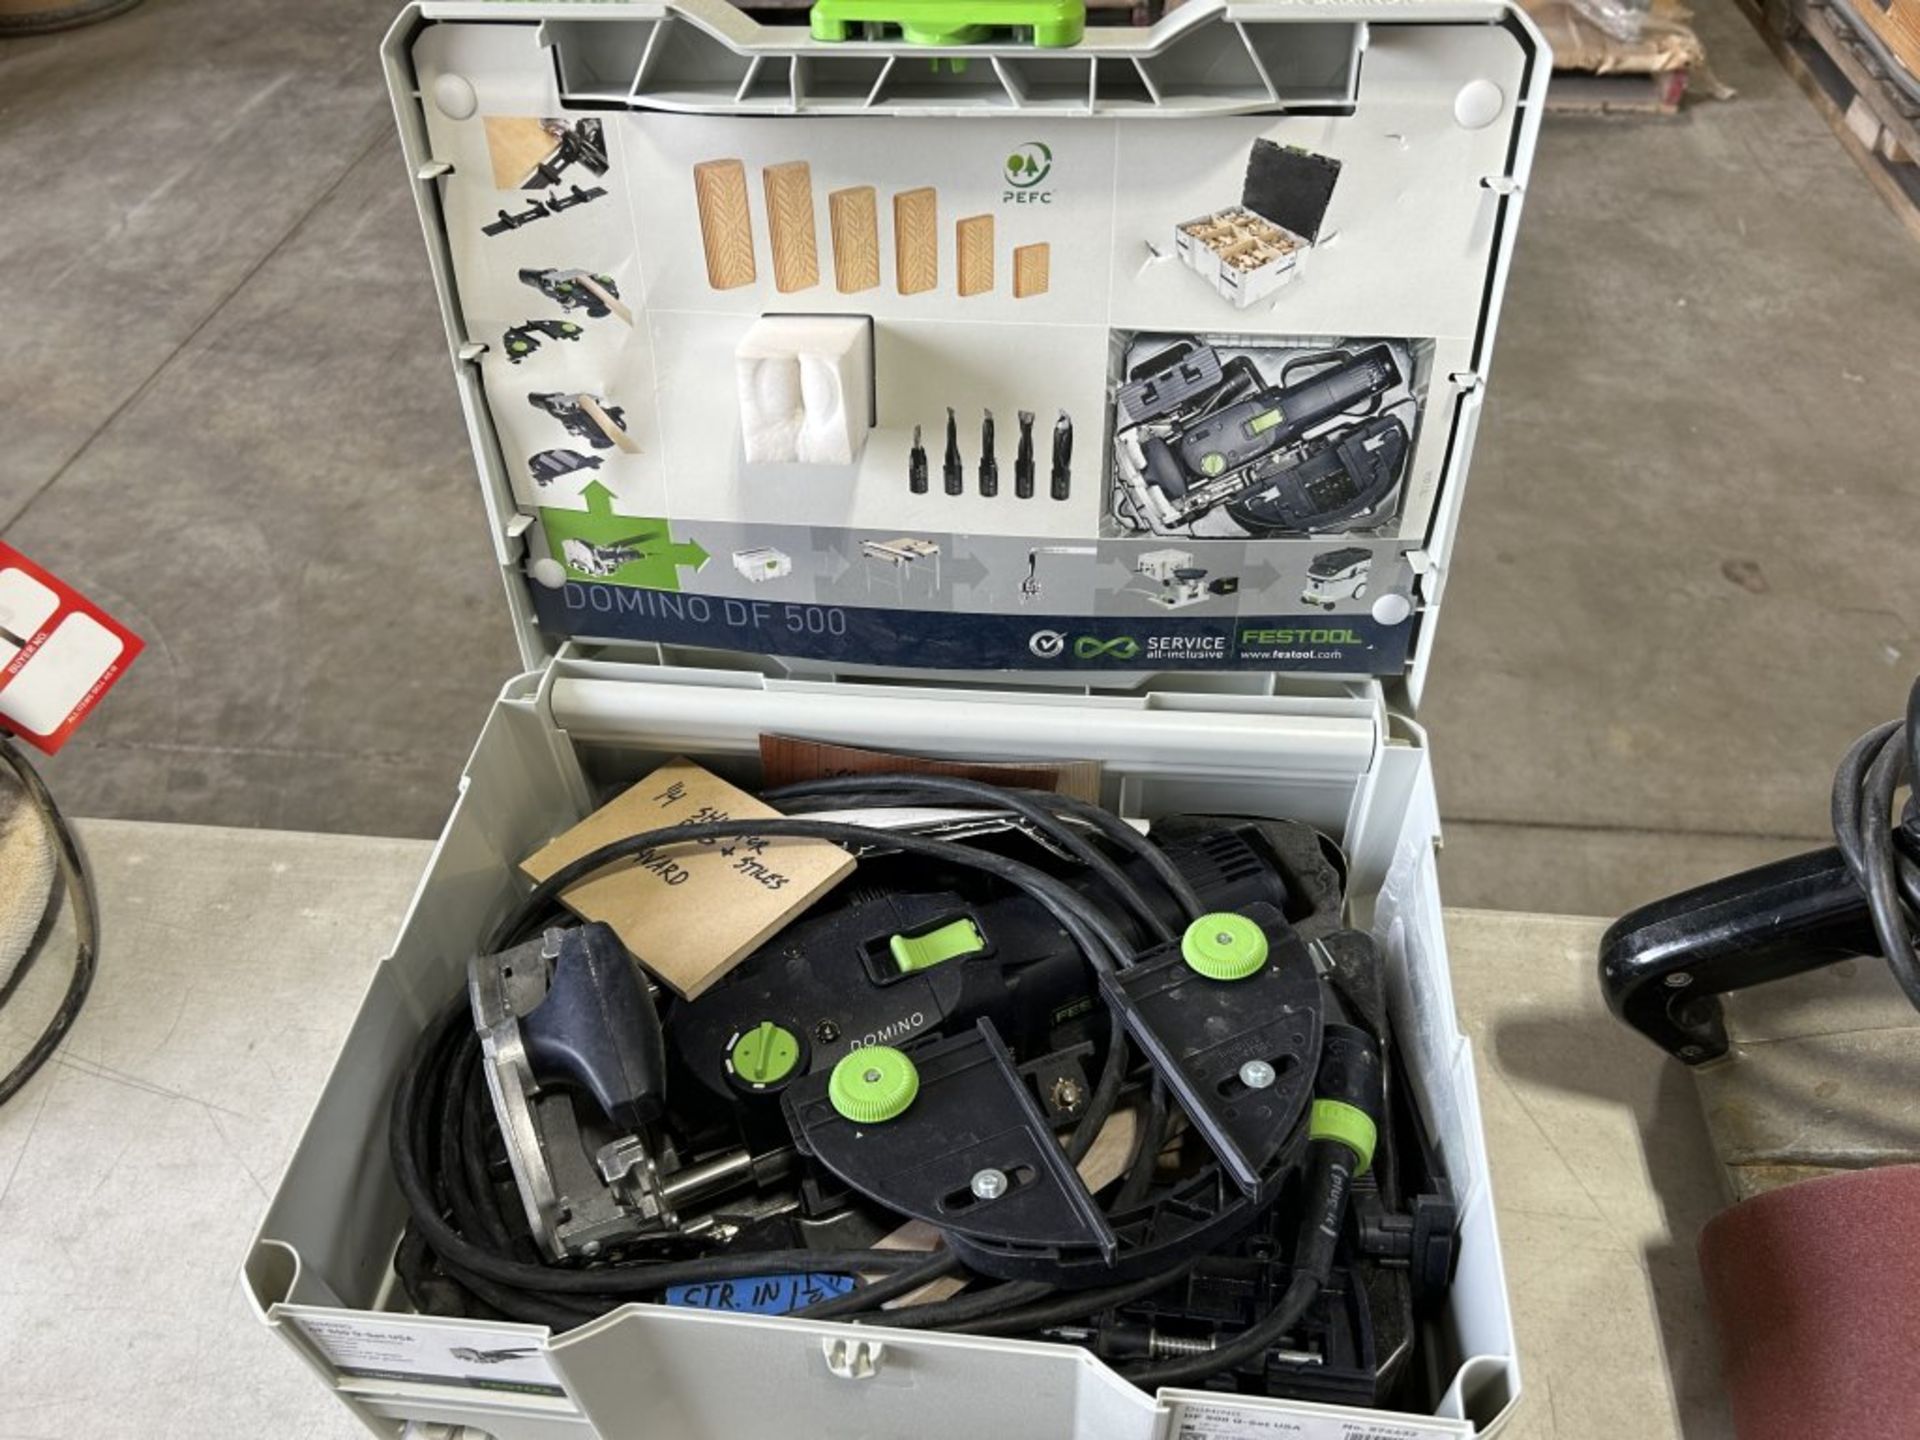 FESTOOL DOMINO DF 500 Q-SET JOINTING MACHINE WITH CASE - Image 4 of 6